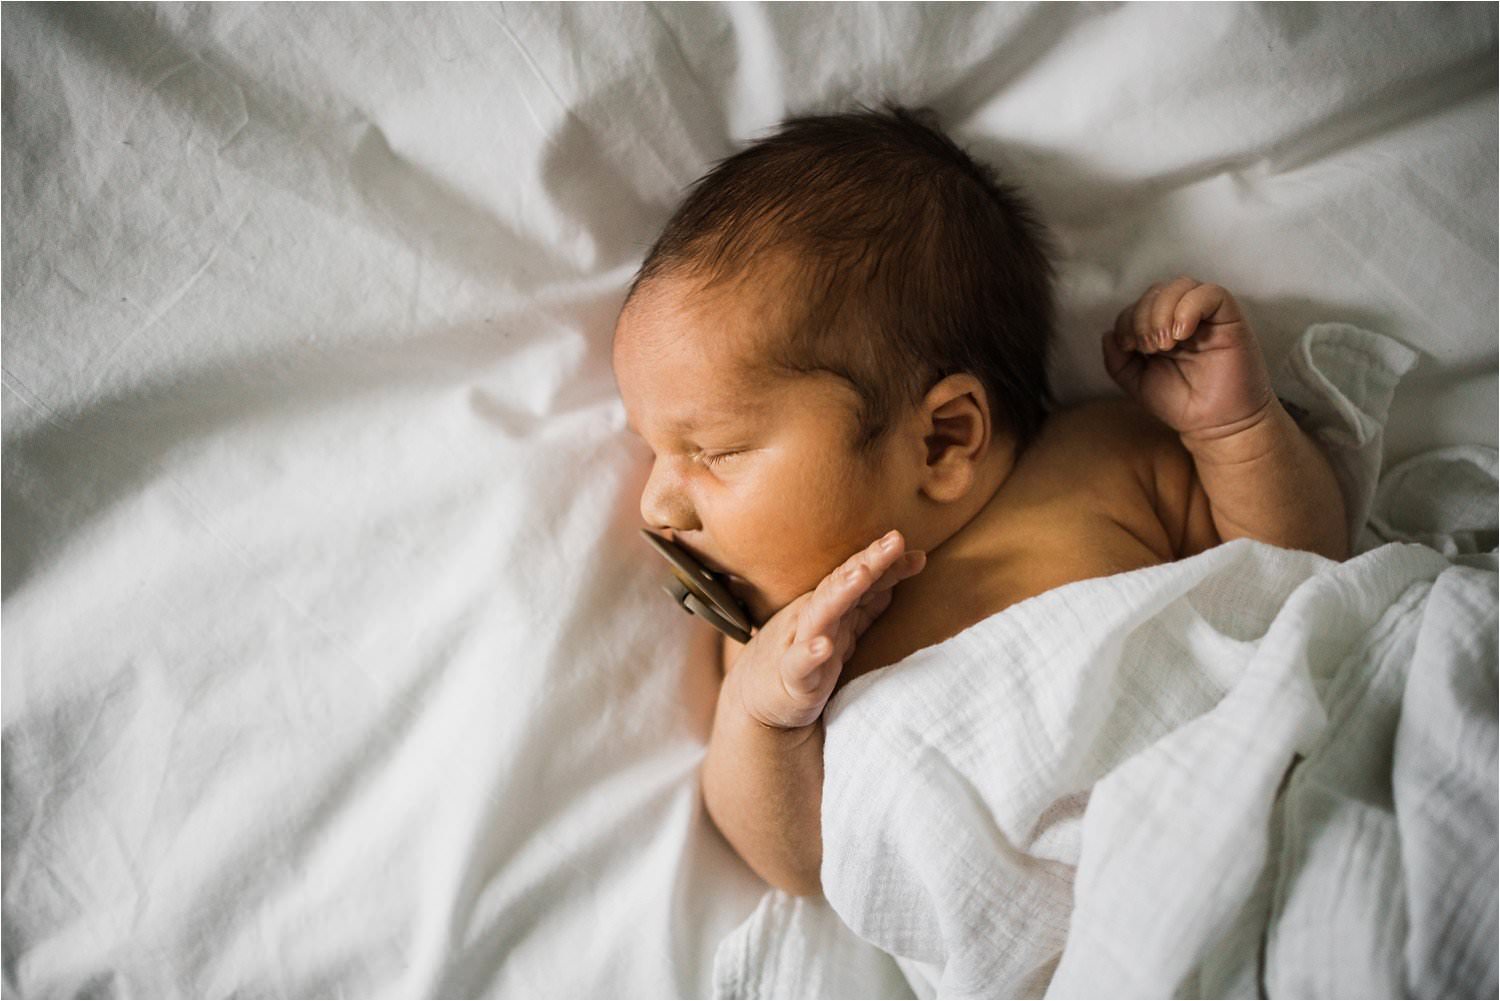 NATURAL NEWBORN PHOTO ON BED